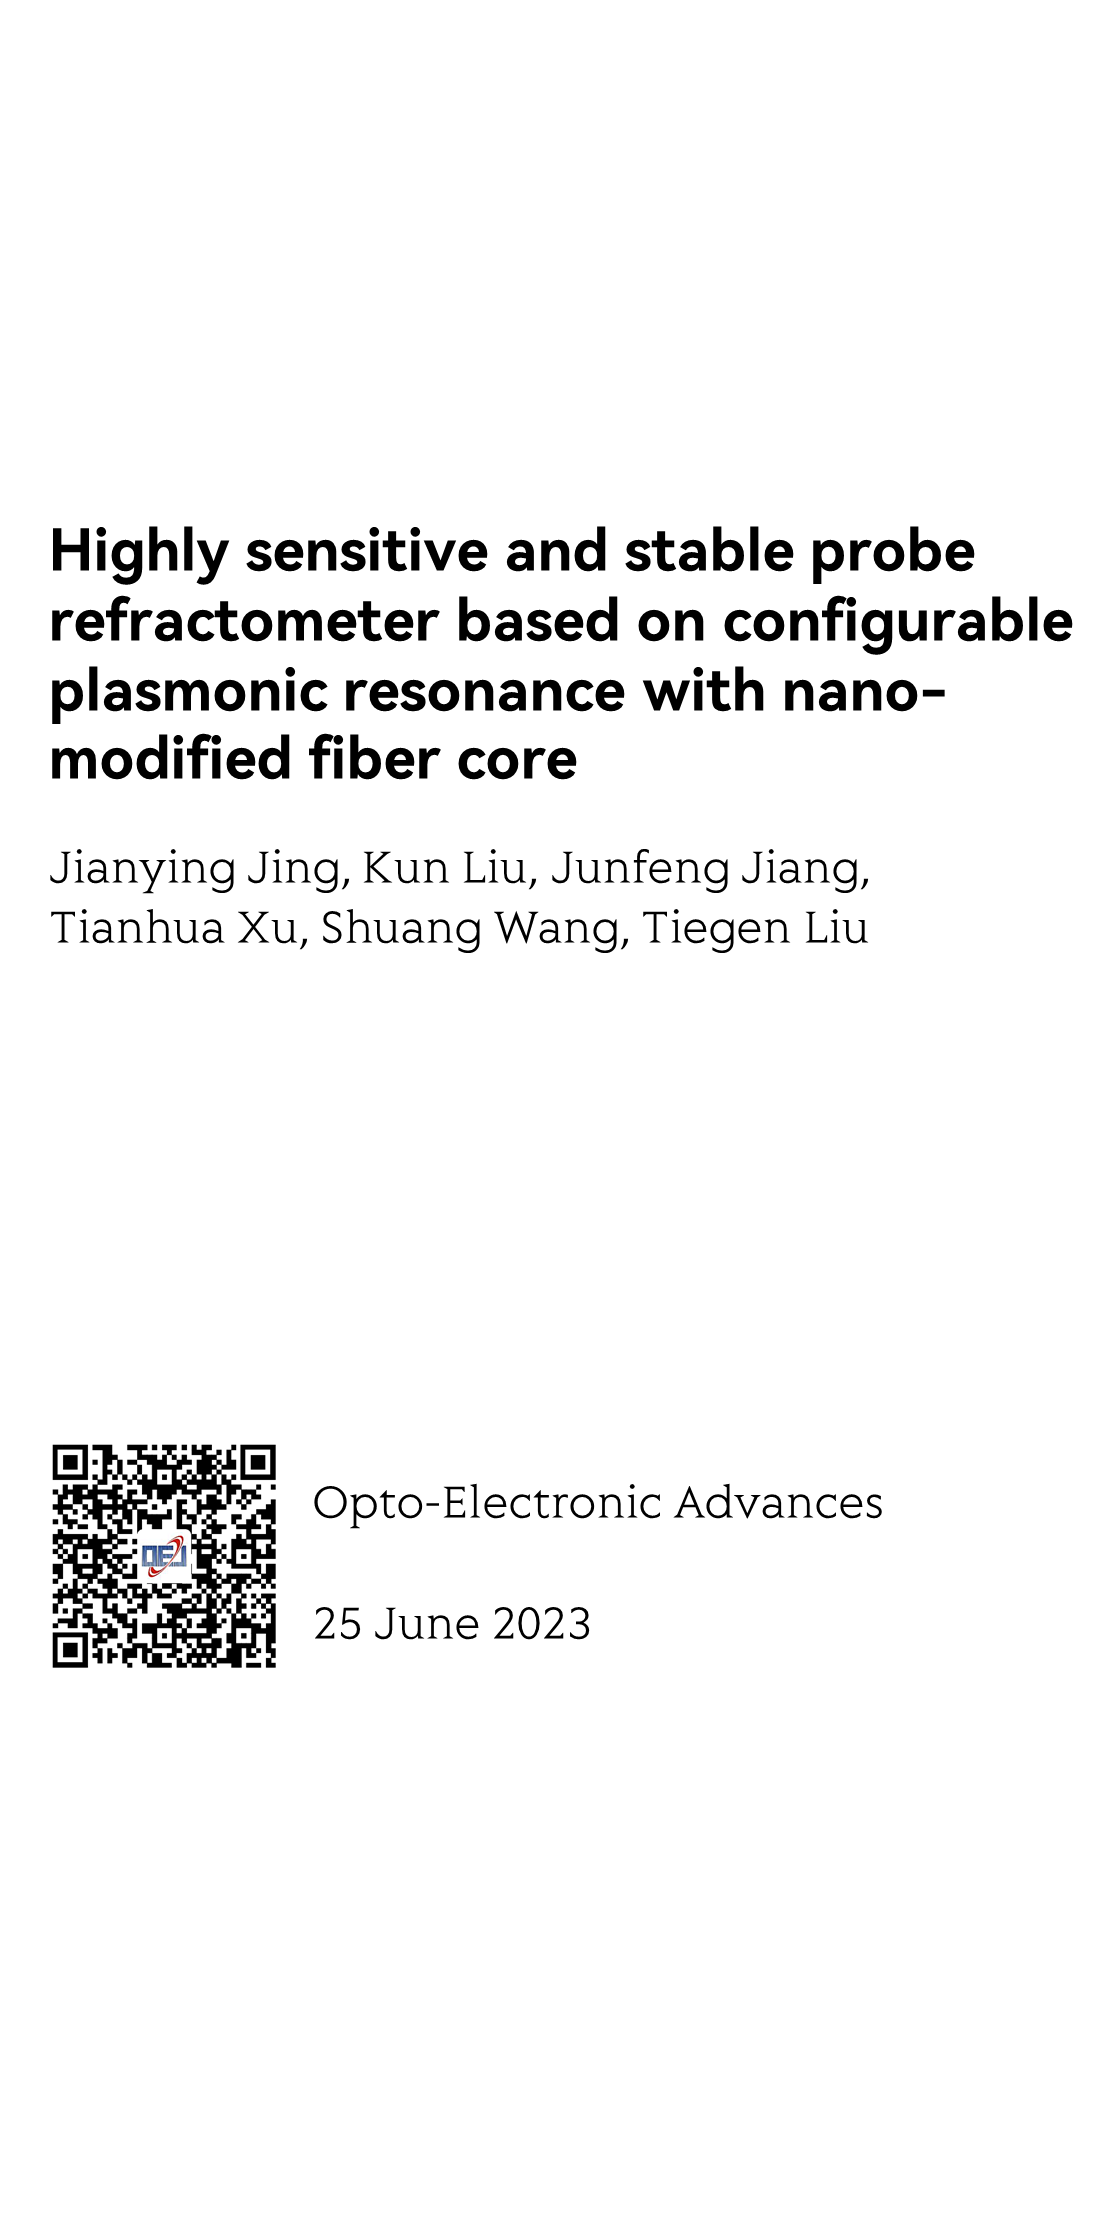 Highly sensitive and stable probe refractometer based on configurable plasmonic resonance with nano-modified fiber core_1